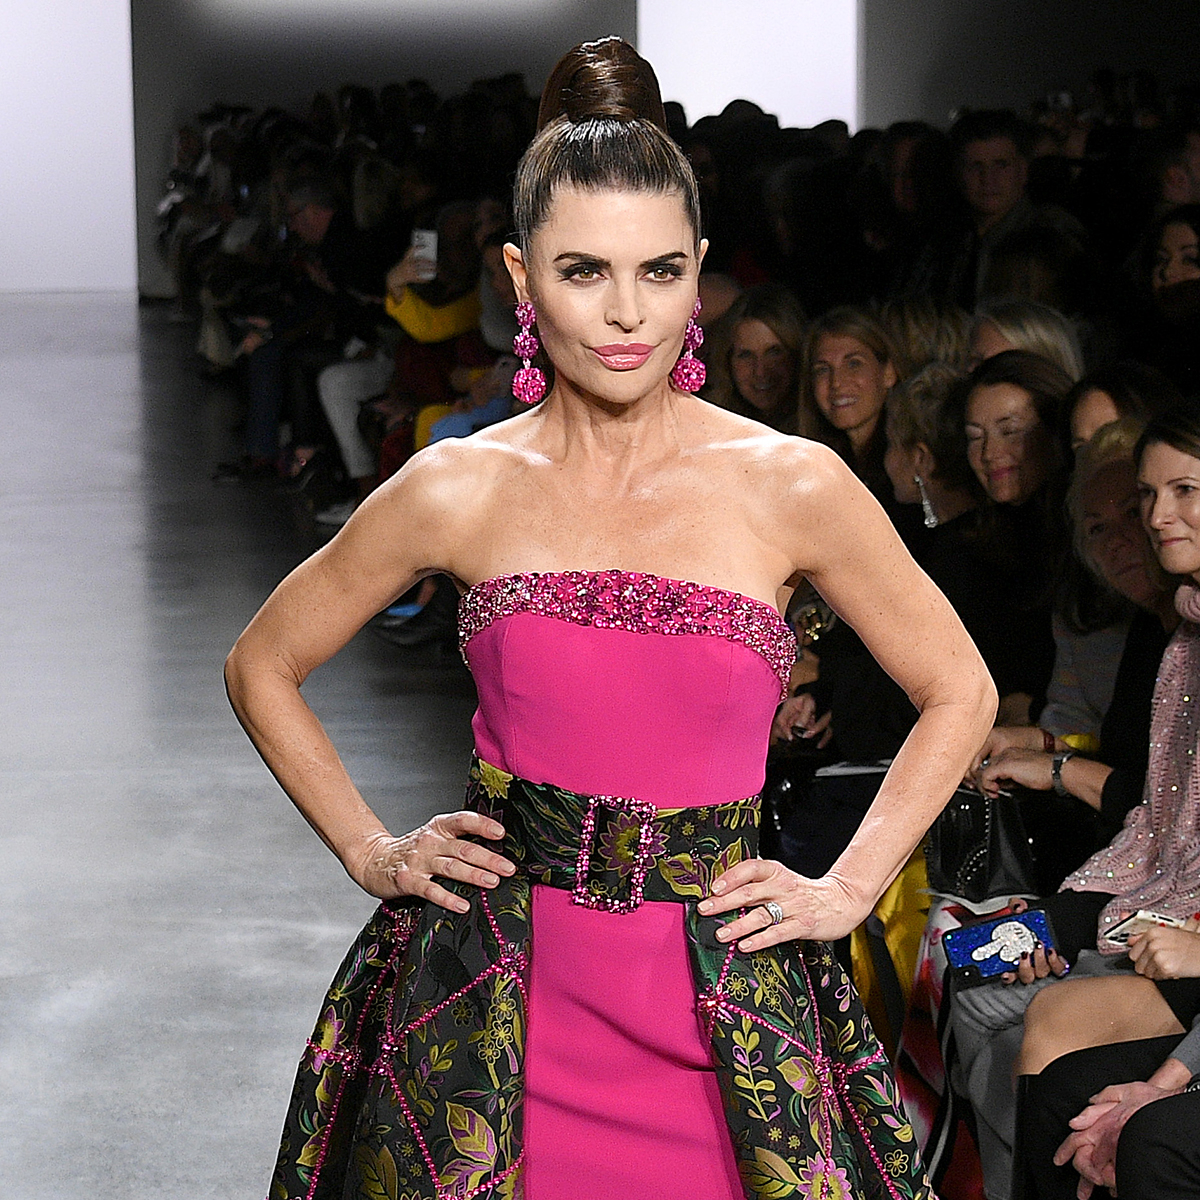 The Real Housewives Walked the Runway at Fashion Week—And Stole the Show